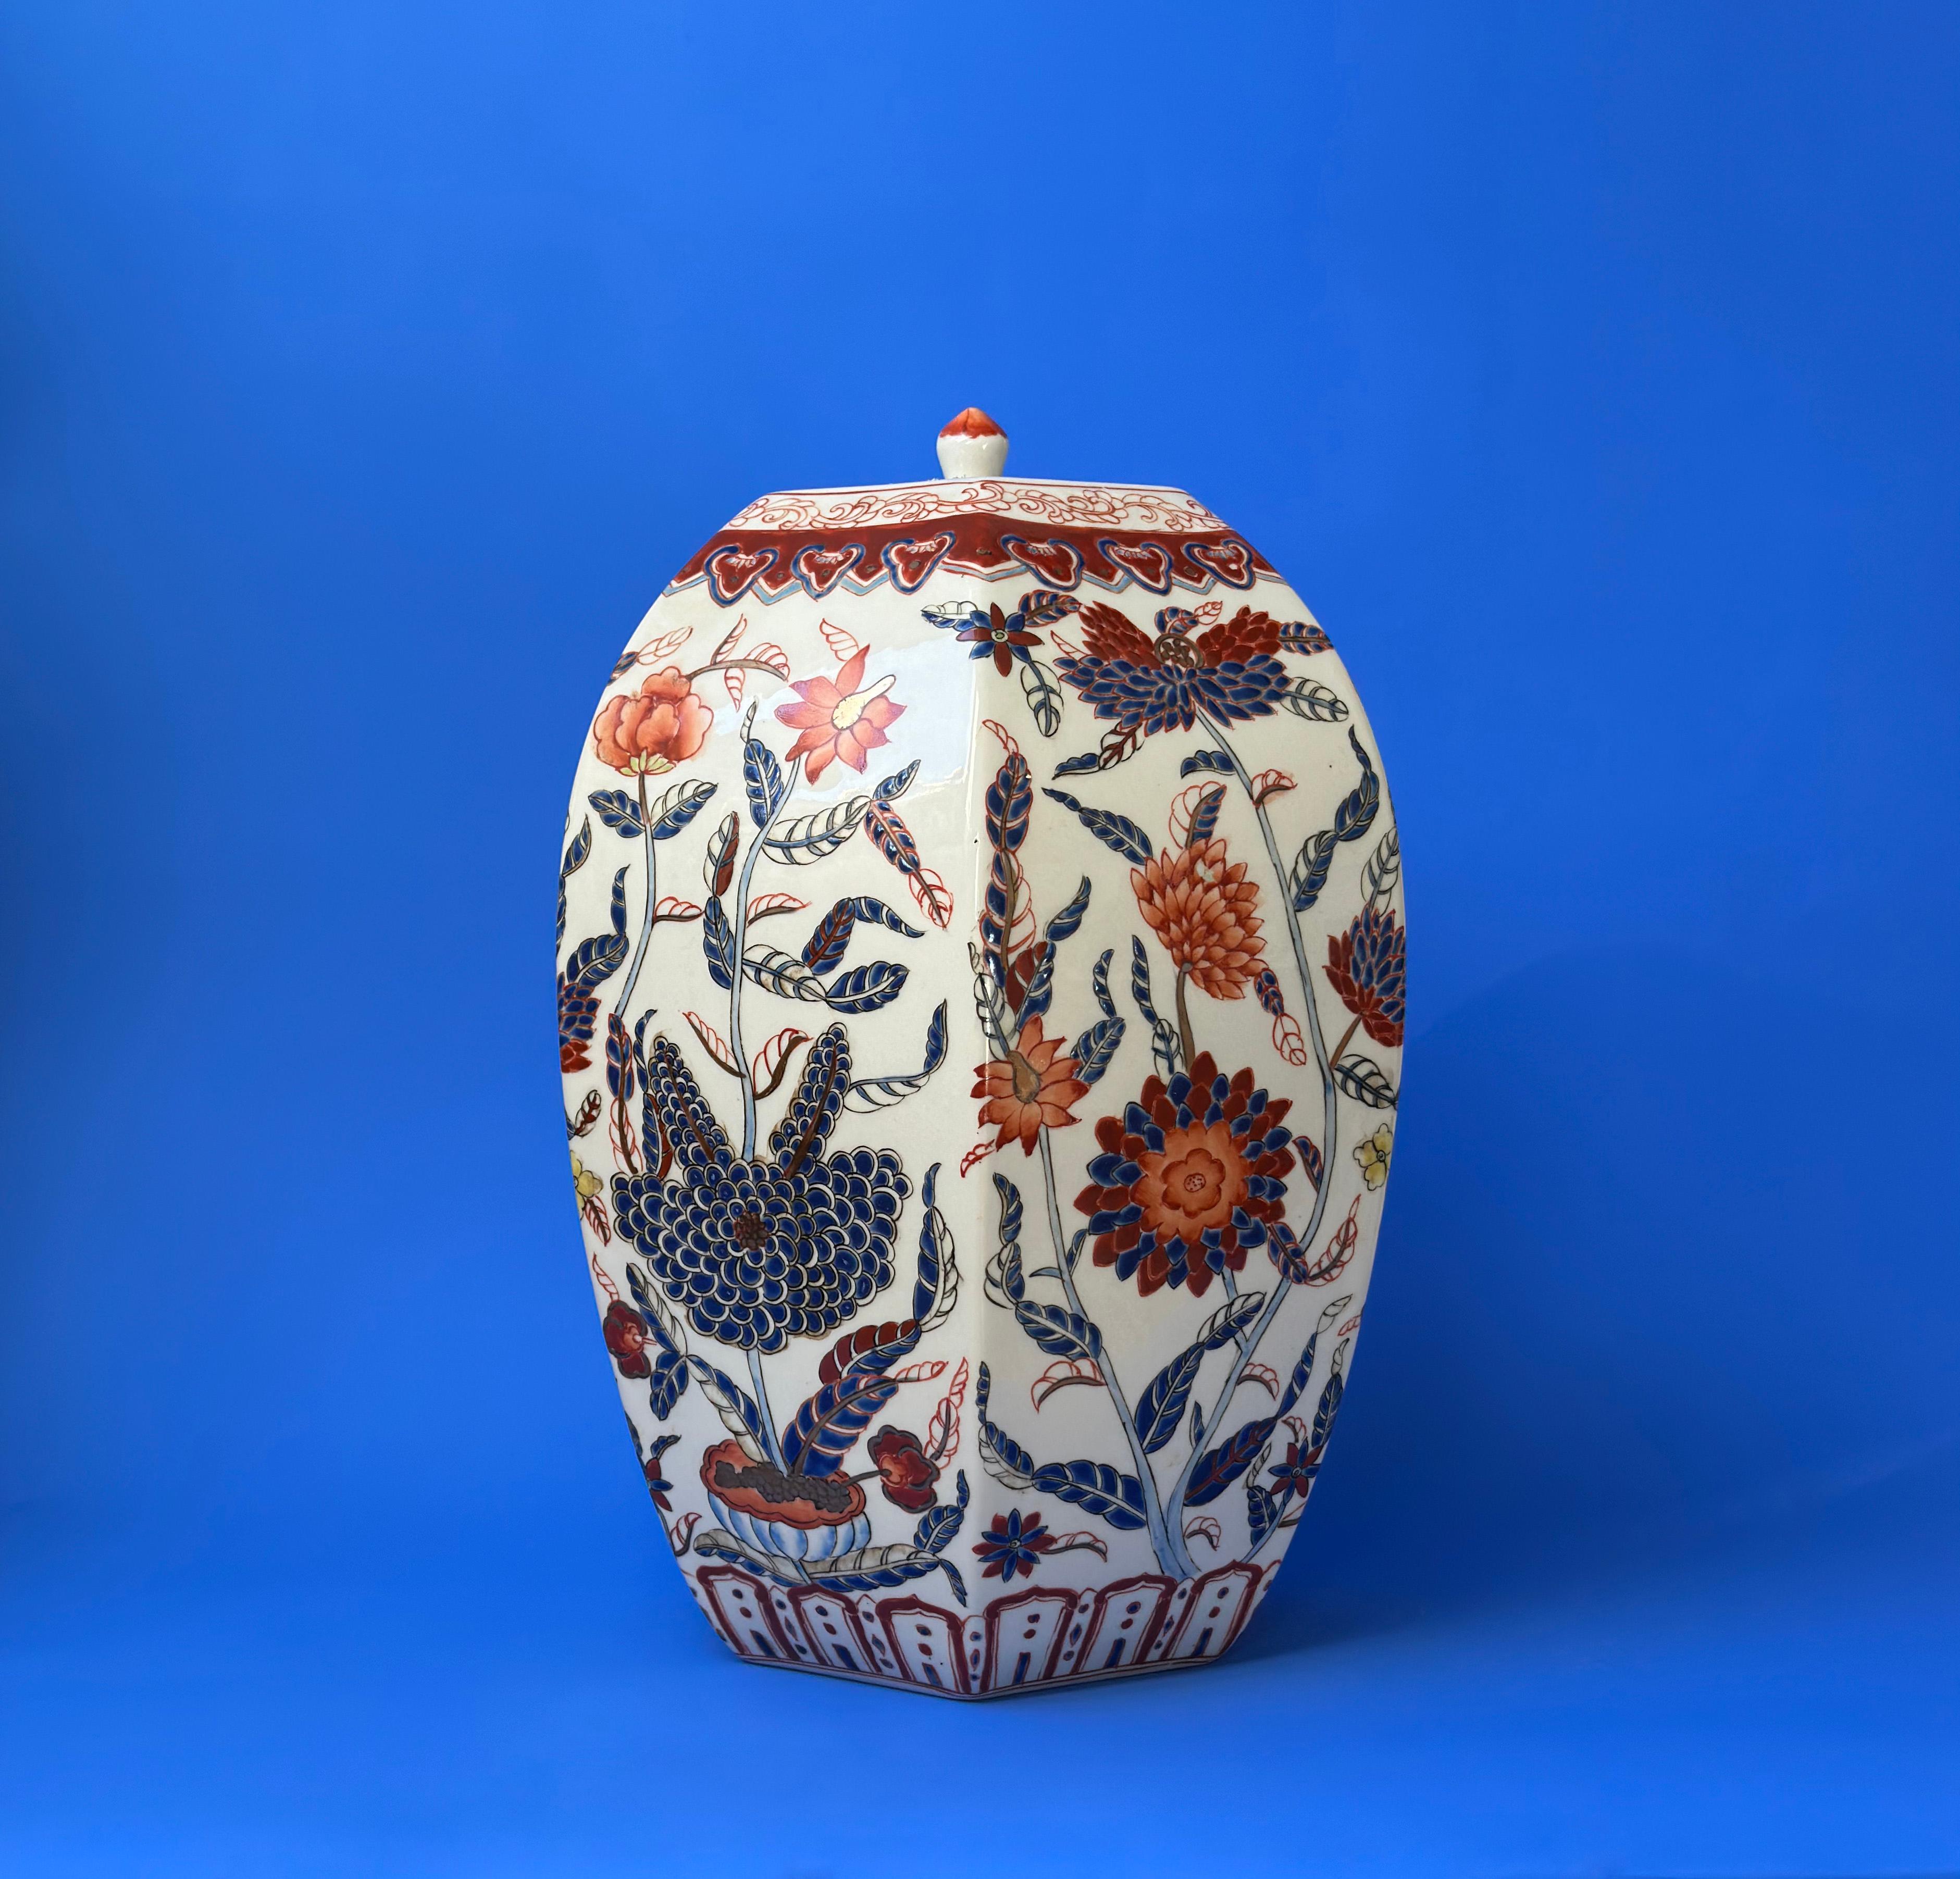 Chinese Porcelain Urn - Vintage 

This large, hexagonal lidded urn is a masterpiece of fine Chinese porcelain. It is meticulously adorned with an elaborate array of floral motifs in red and blue, which gracefully extend upwards and around the urn's